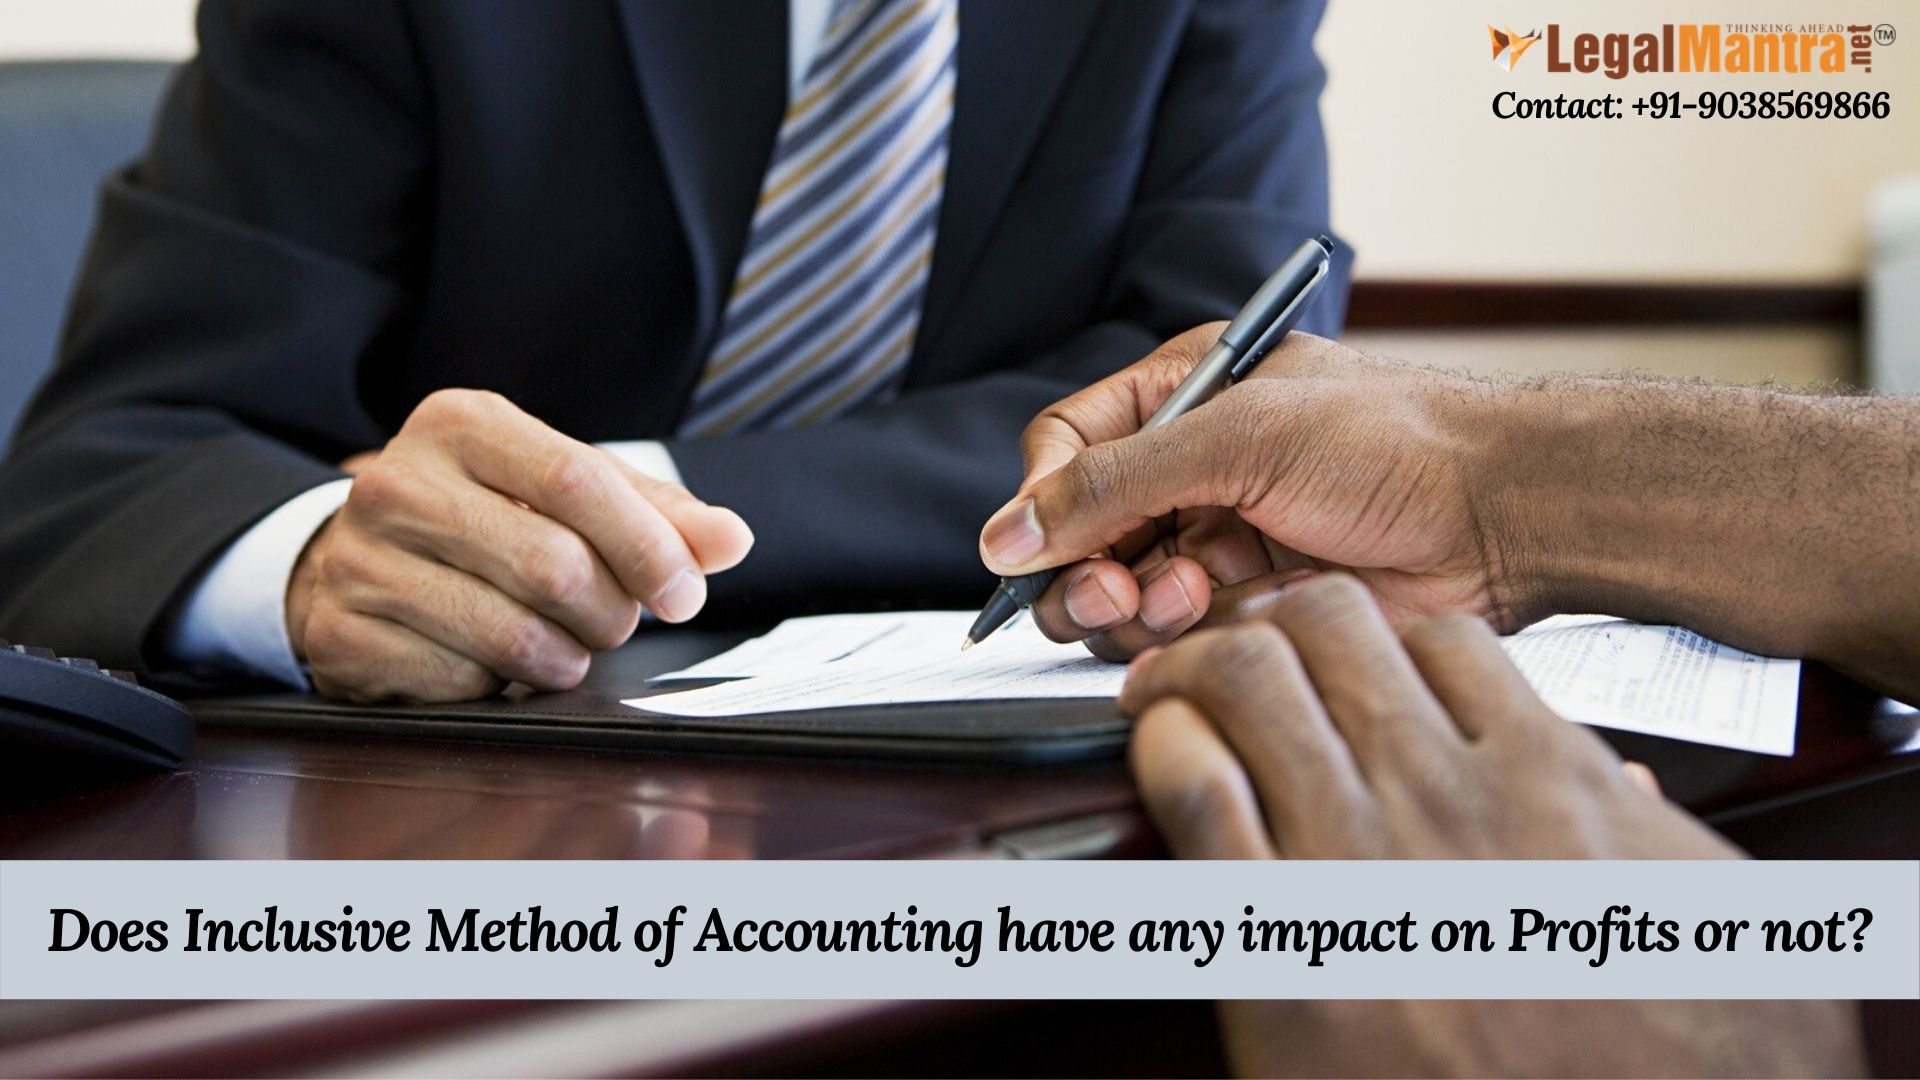 Does Inclusive Method of Accounting have any impact on Profits or not?